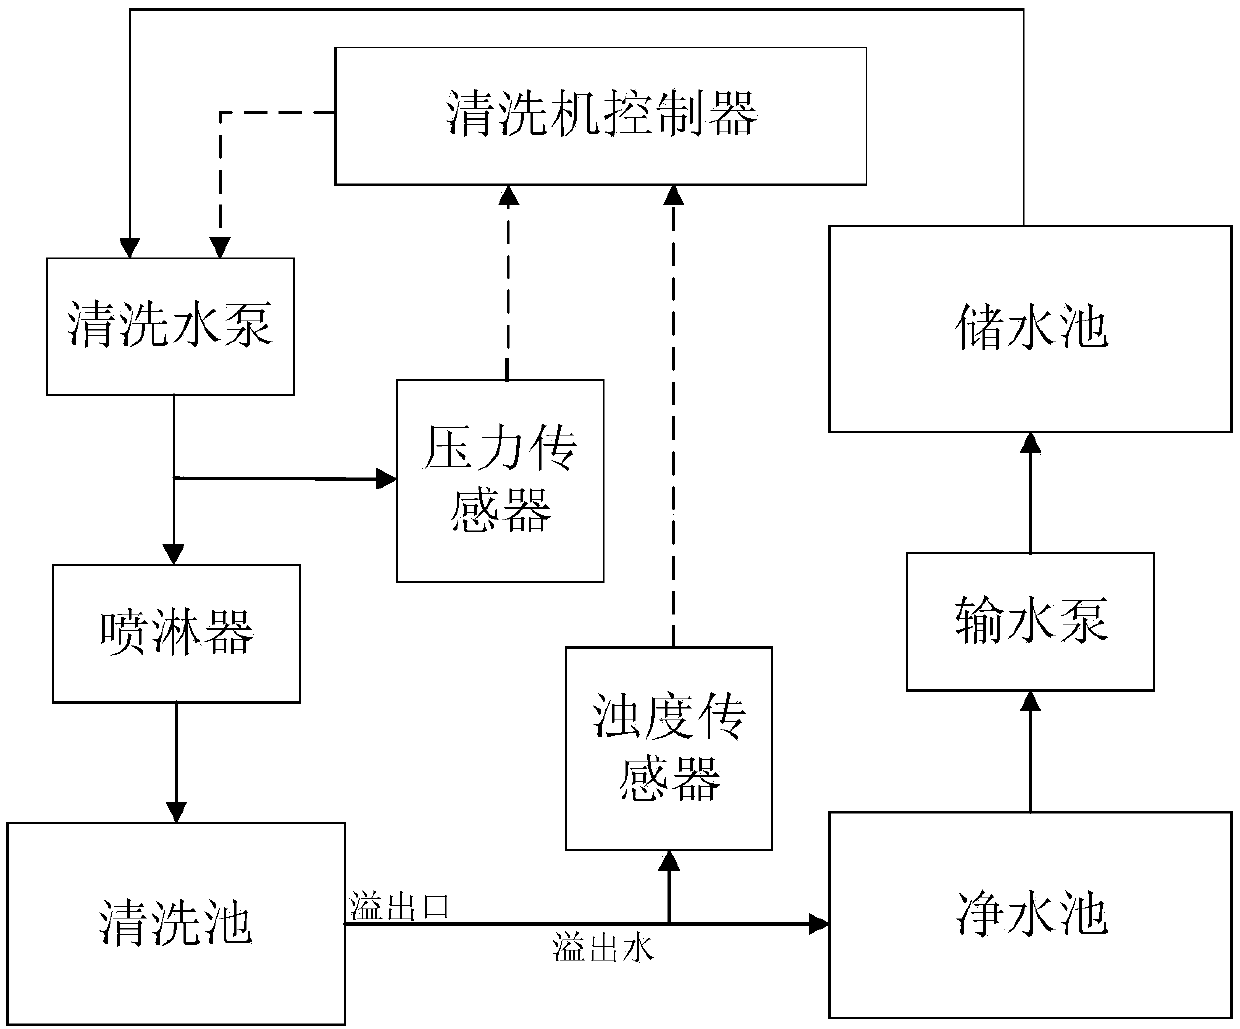 Neural network prediction and control method for water turbidity in medicine automatic cleaning process of traditional Chinese medicine decoction pieces